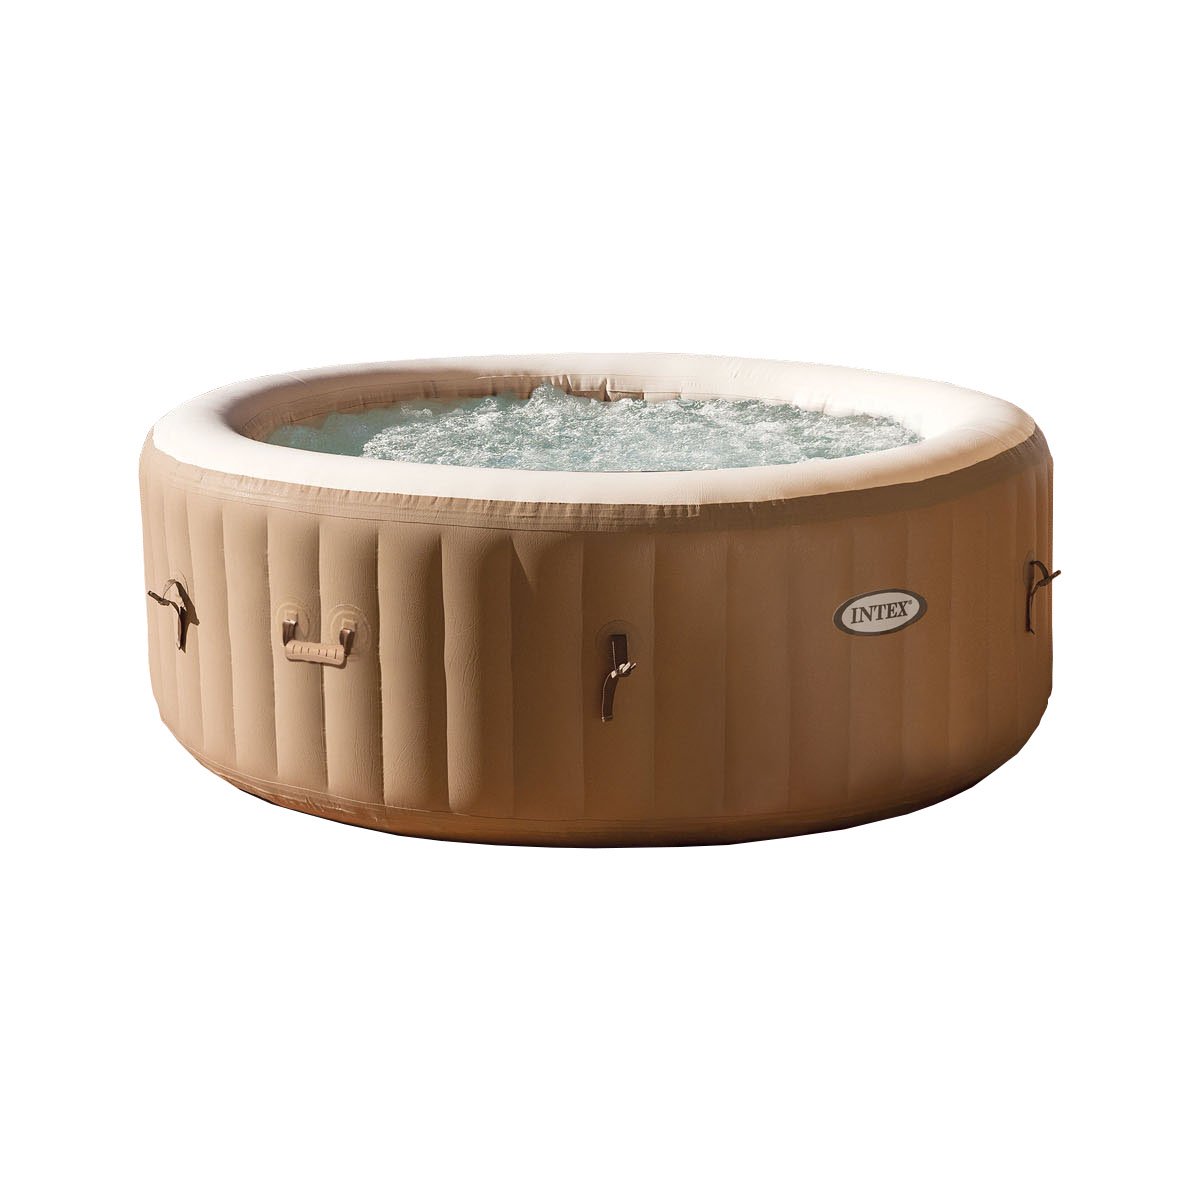 Intex PureSpa 77 Inch 4 Person Inflatable Round Hot Tub Spa with Bubble Jets - image 1 of 11